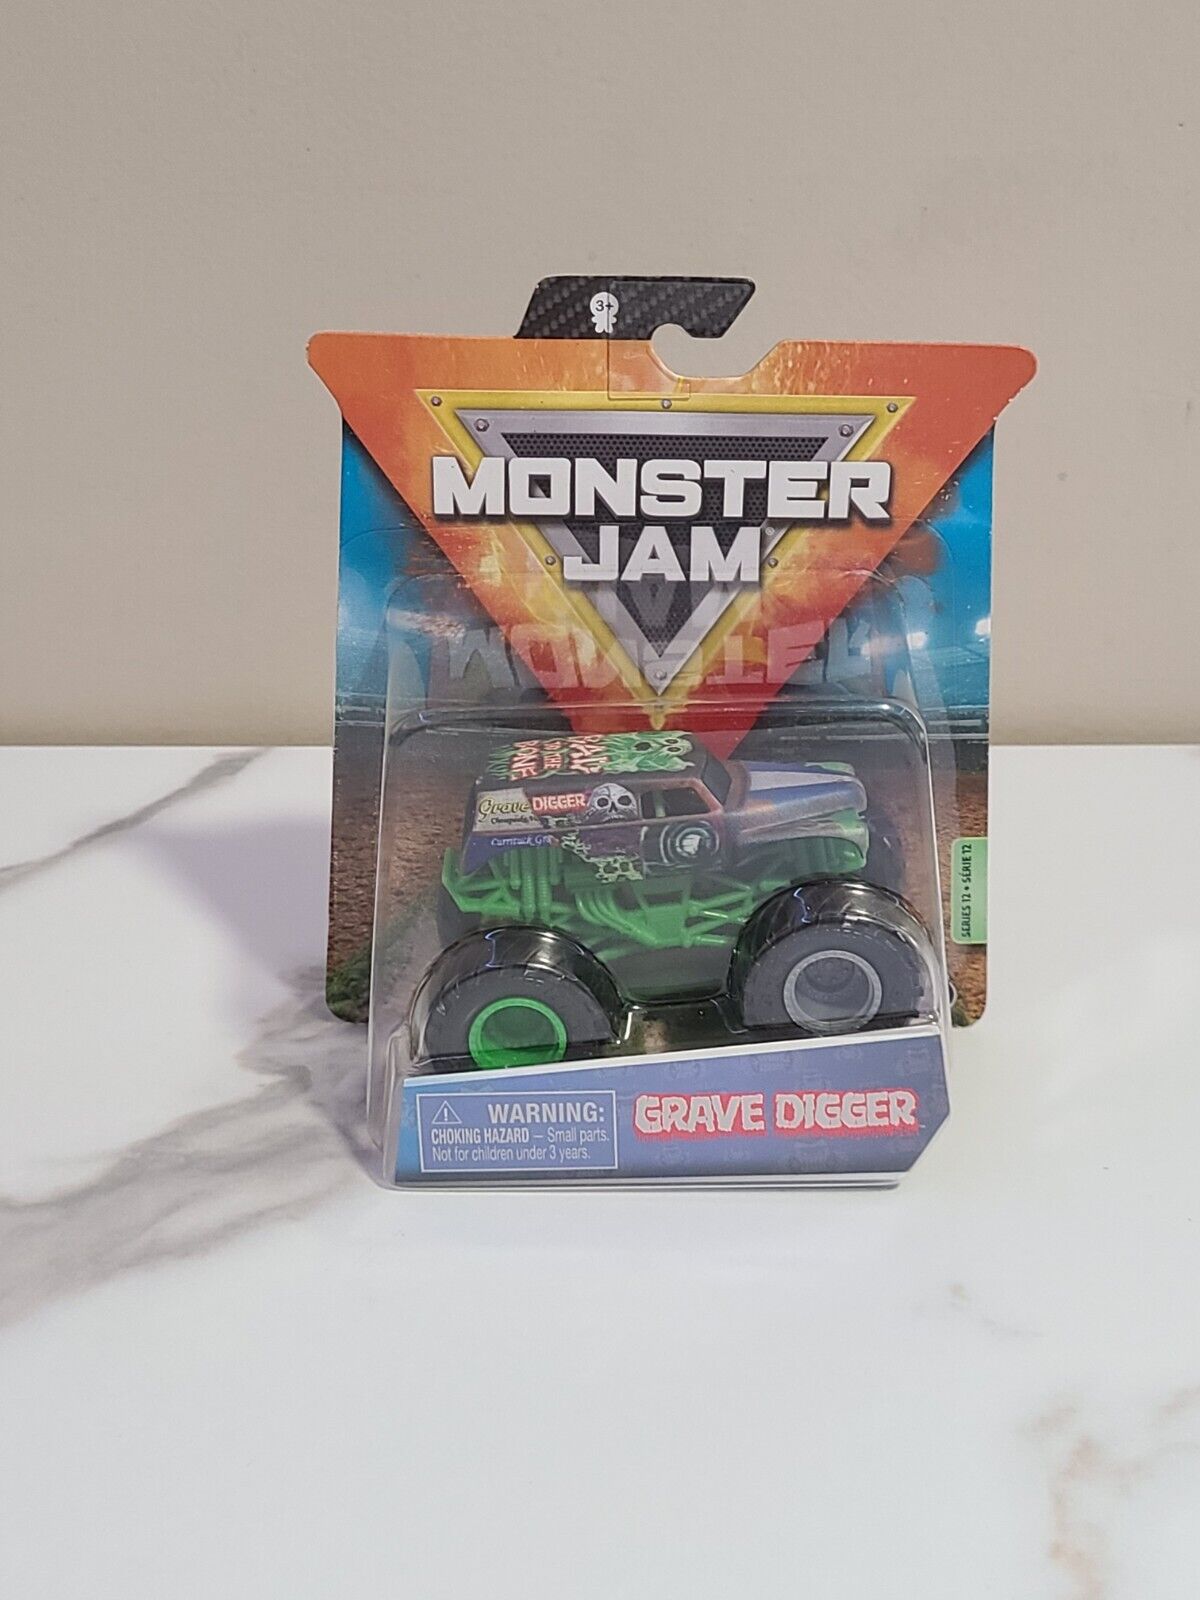 GRAVE DIGGER WRECKLESS TRUCK FROM SPIN MASTER BLACK SERIES 12 INCLUDES WRISTBAND